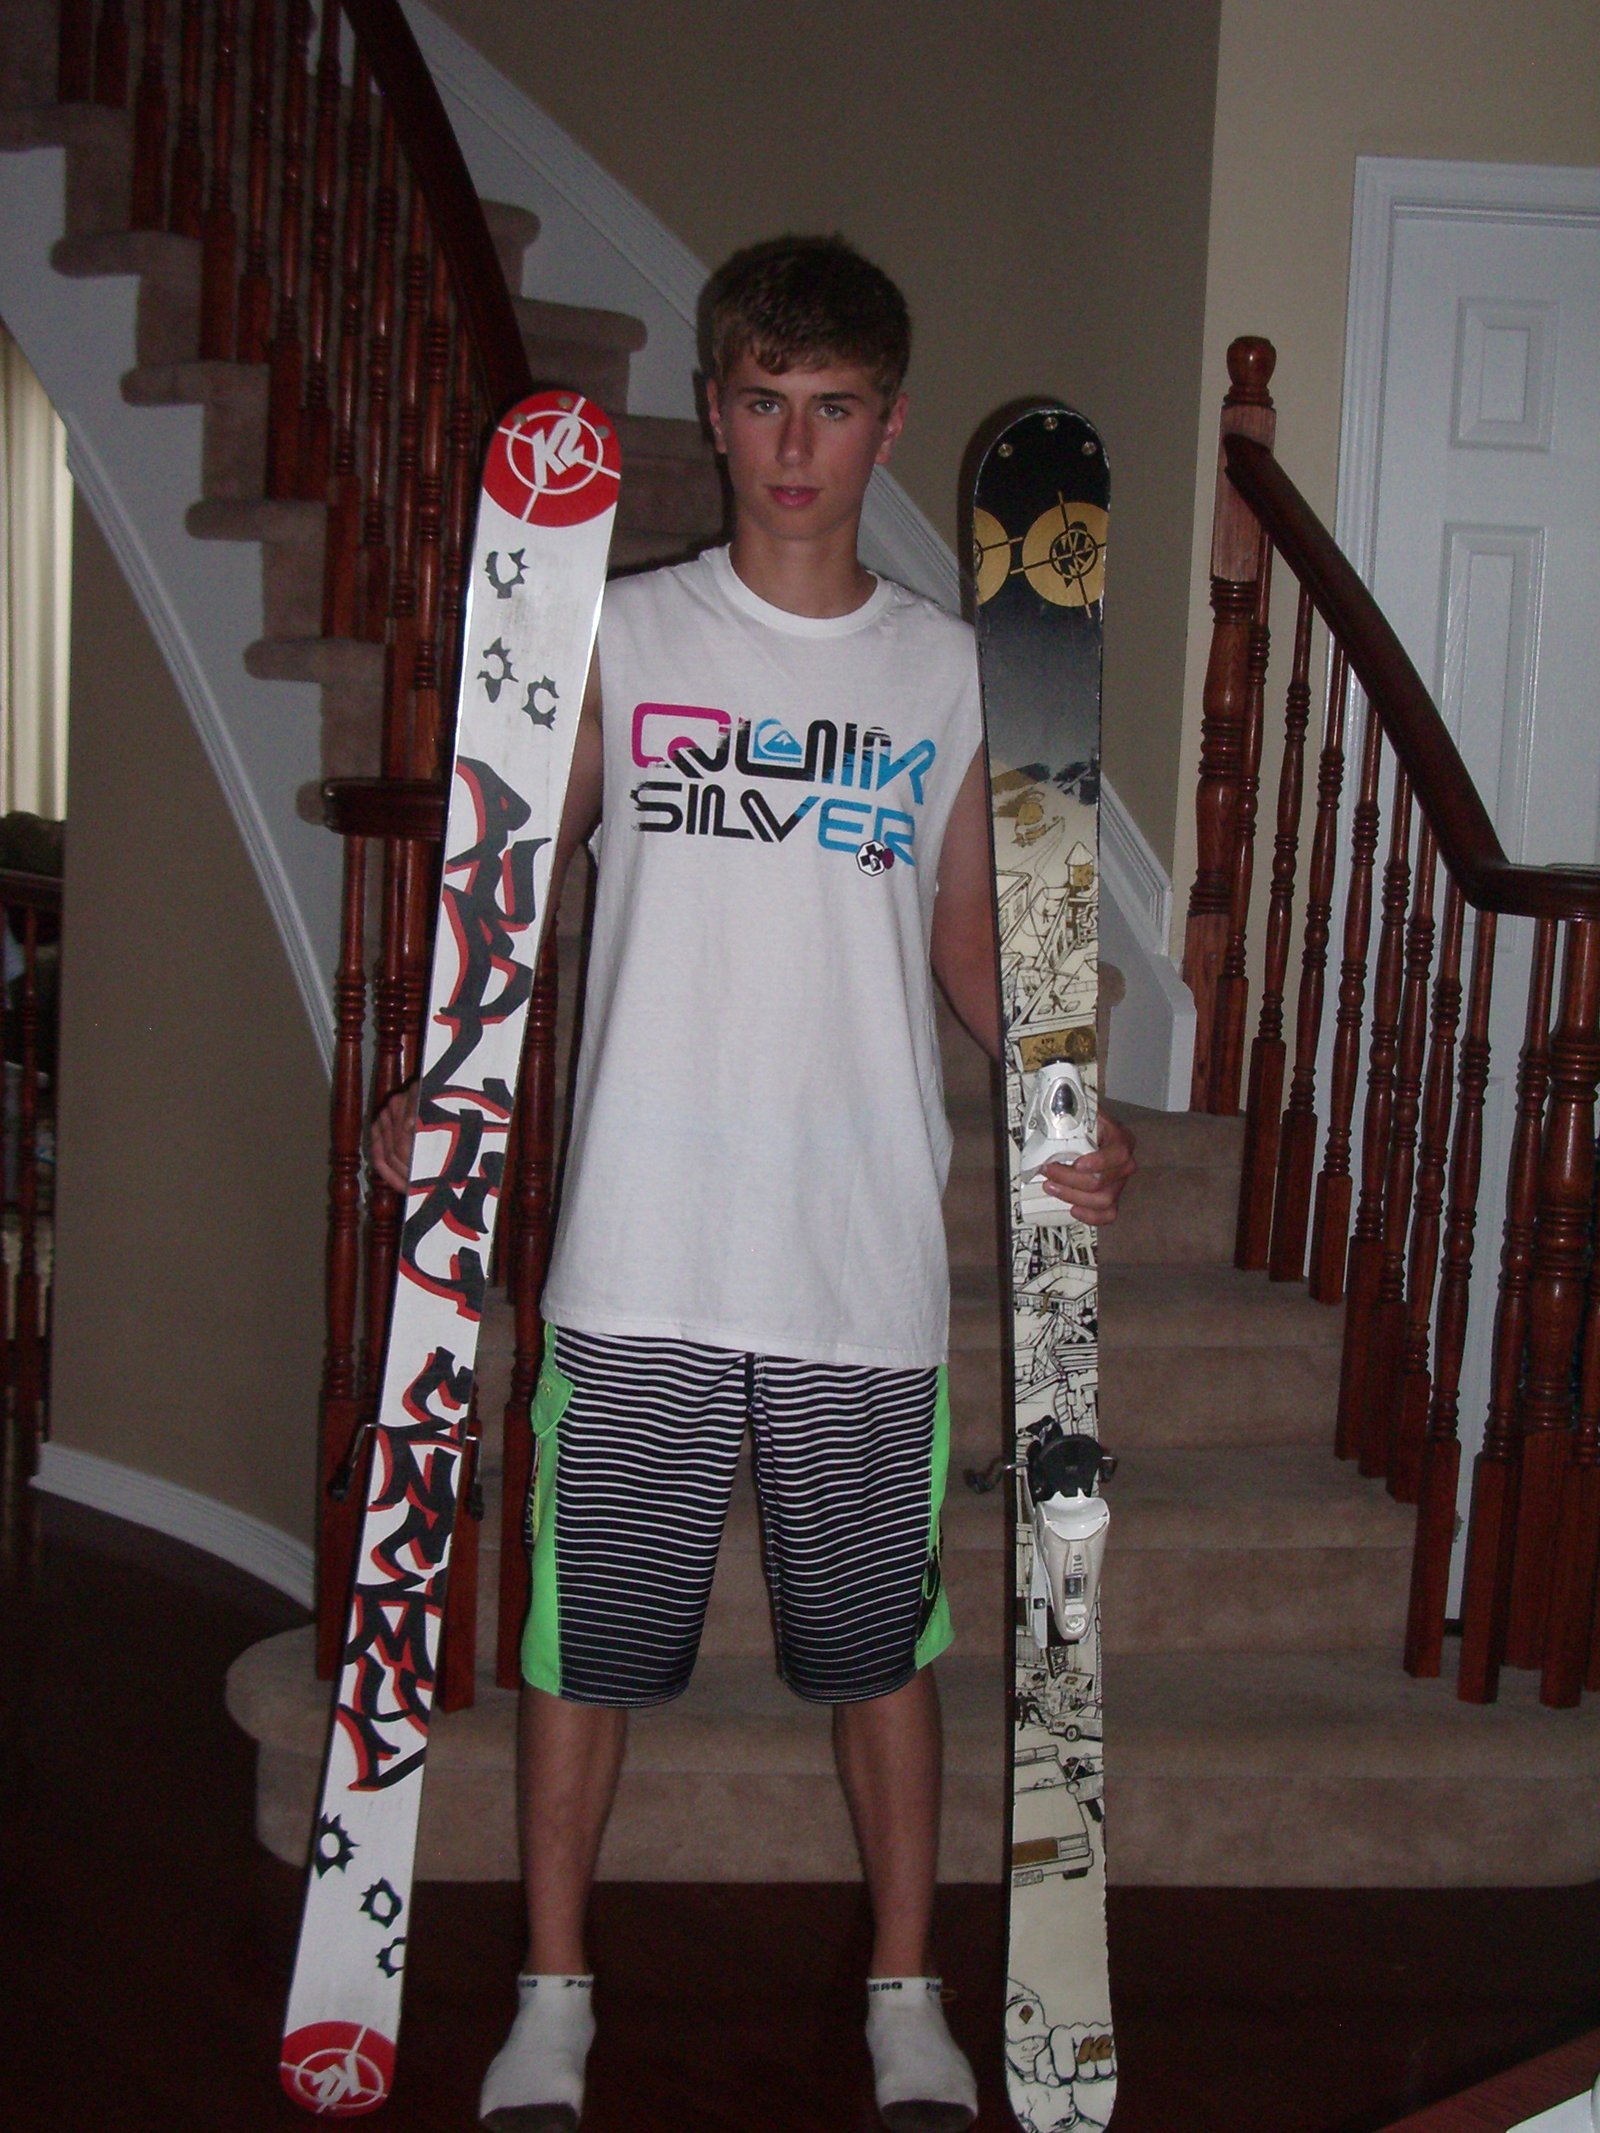 Me and my skis